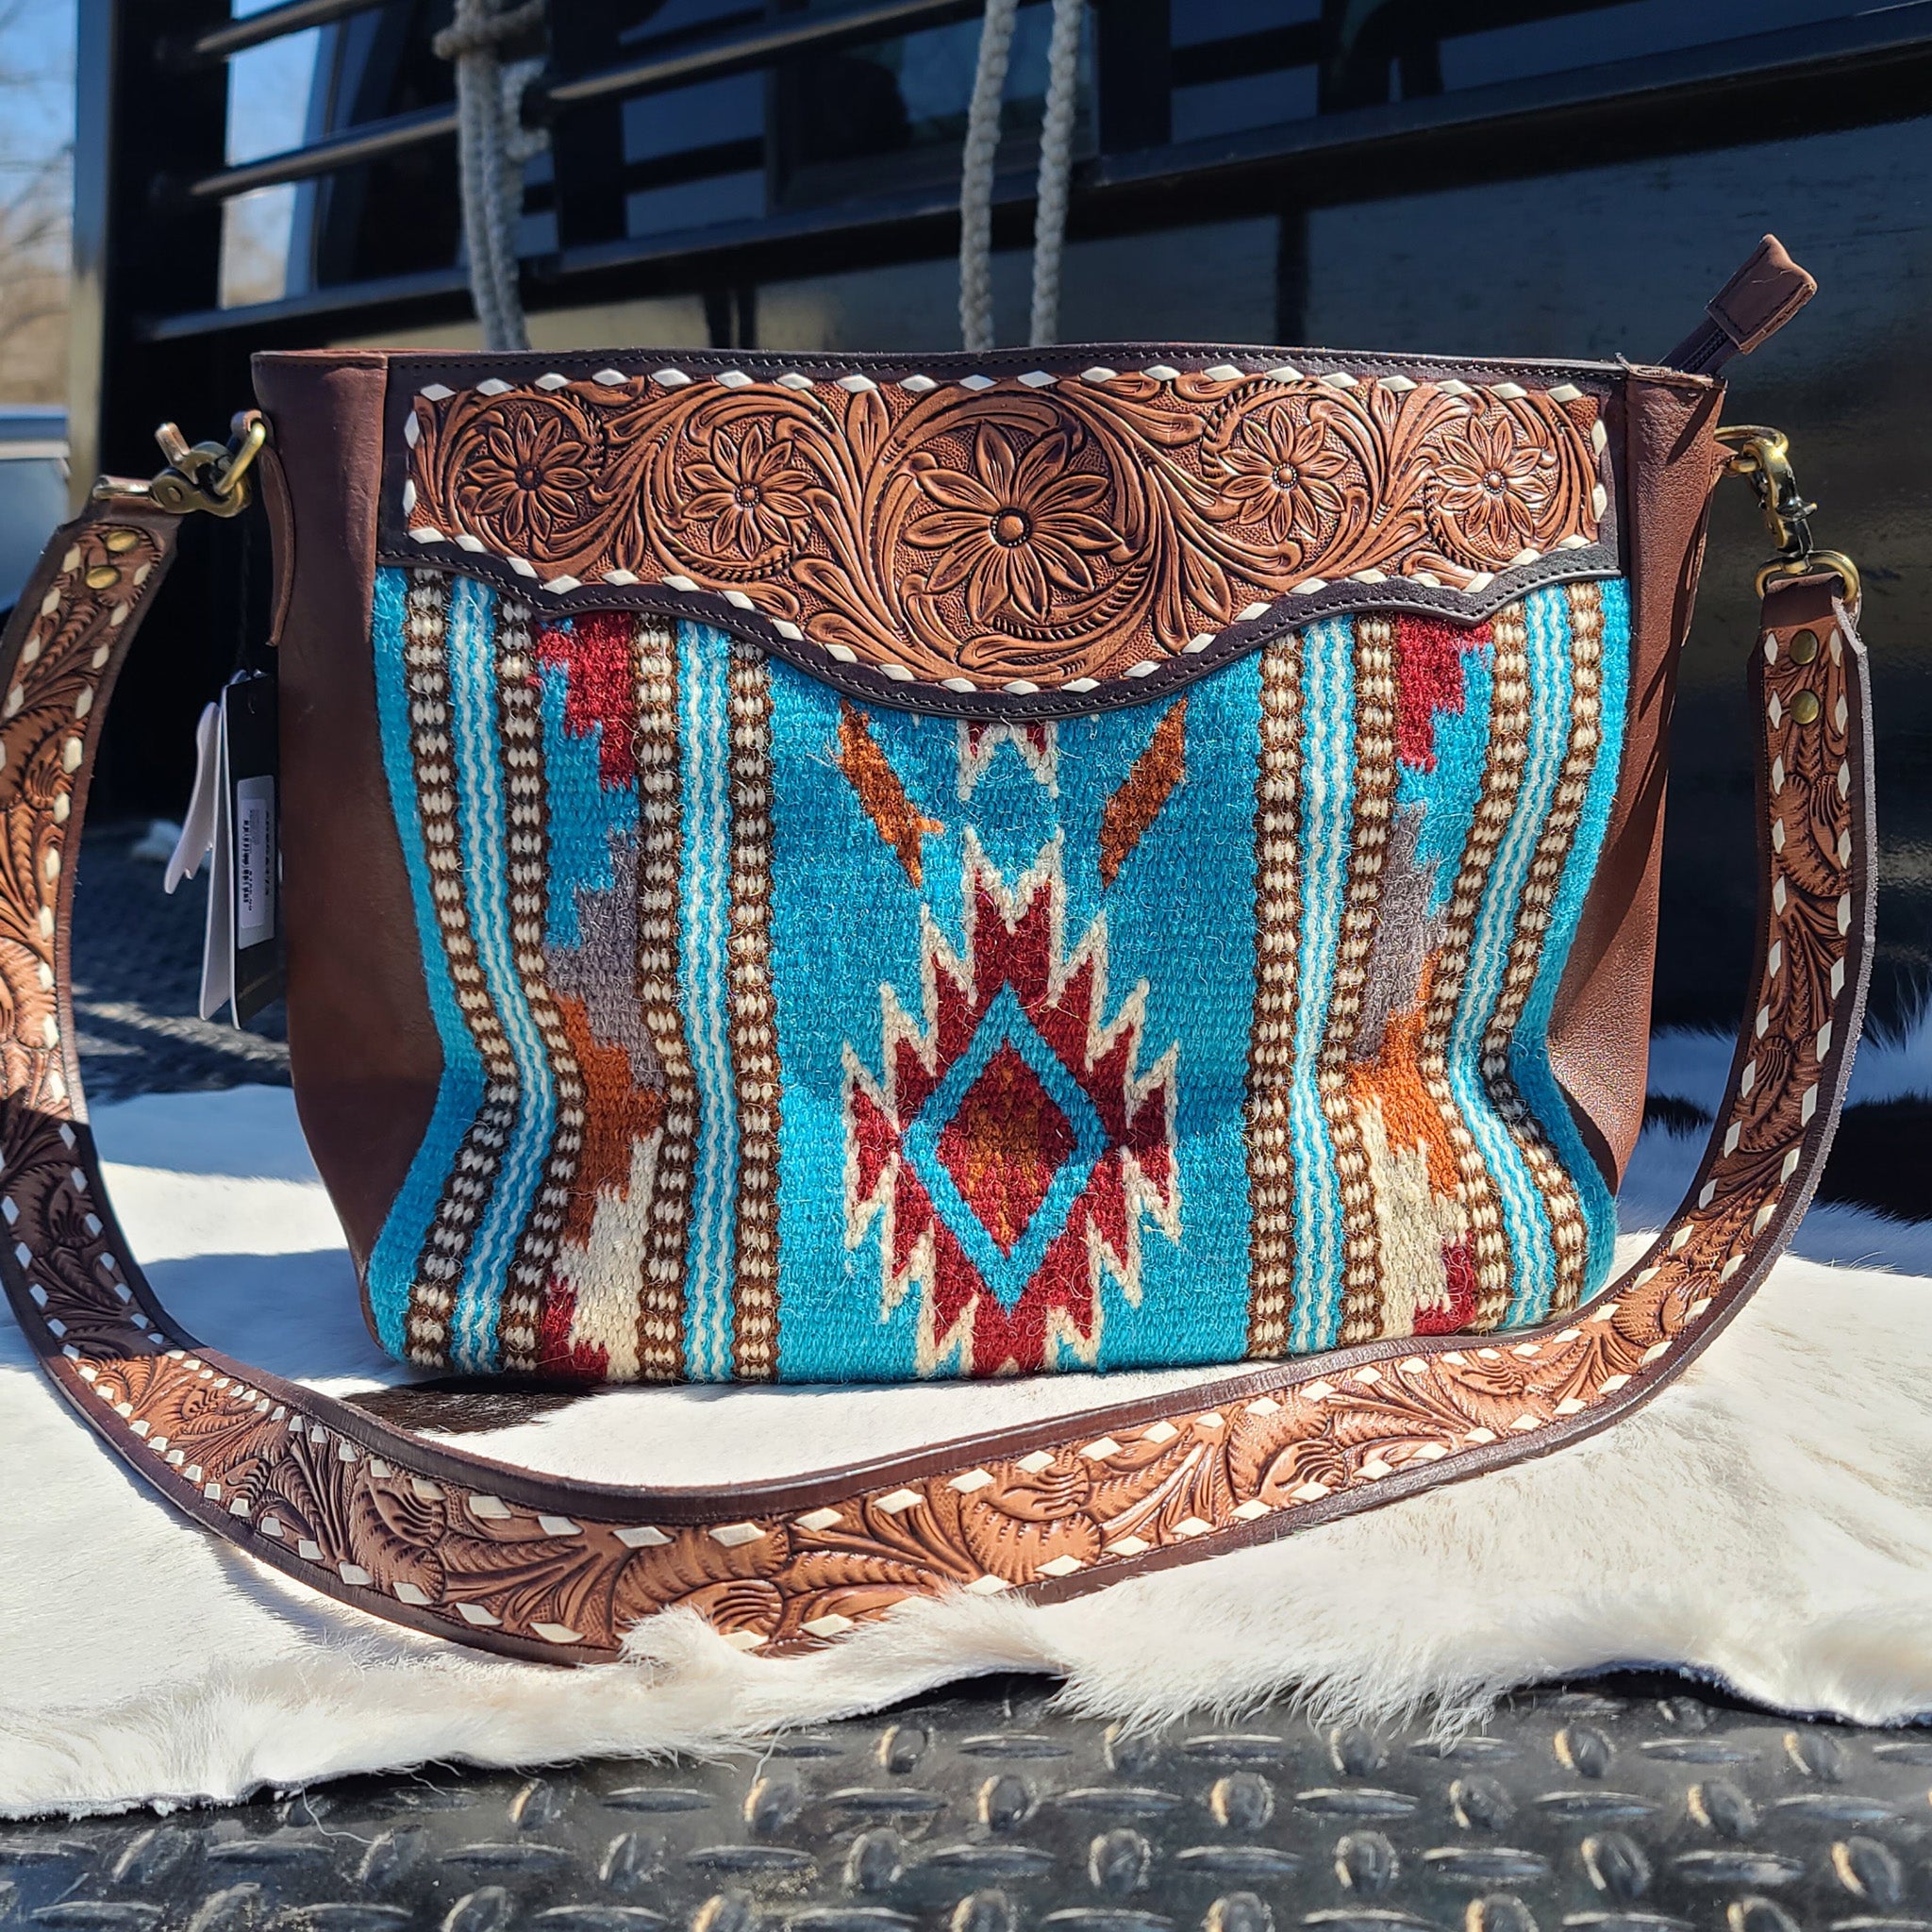 Tooled Leather Shoulder Tote-Turquoise